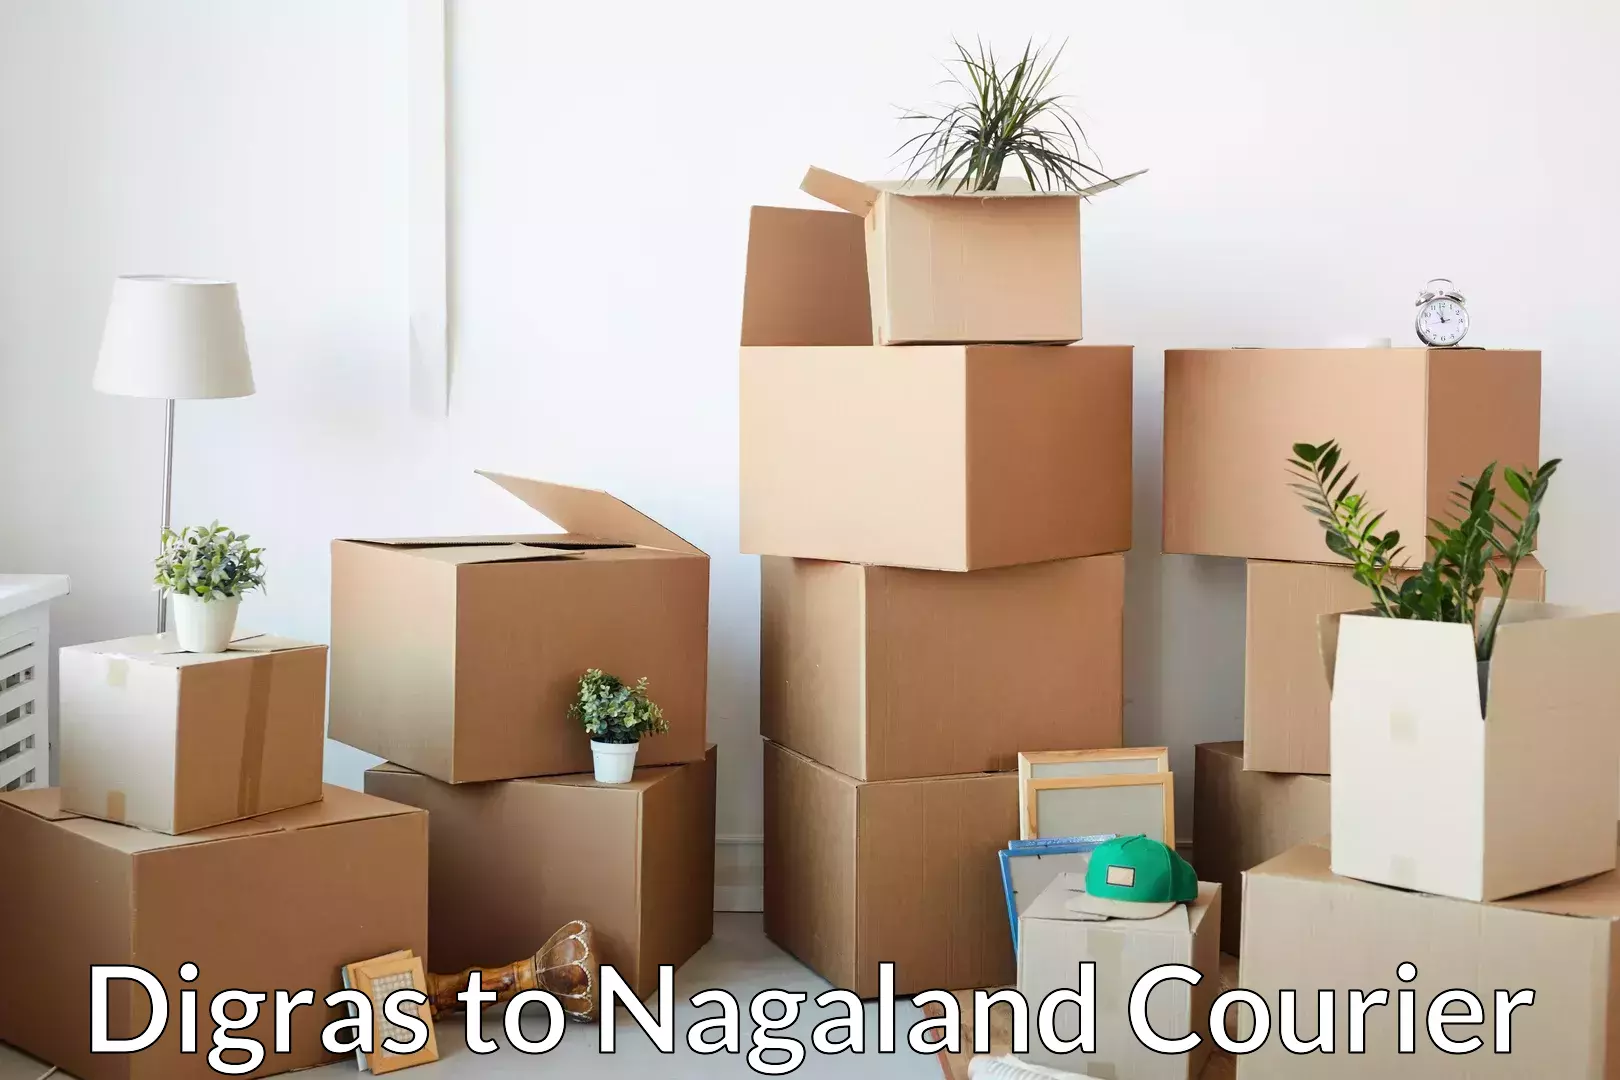 Skilled furniture movers Digras to Nagaland